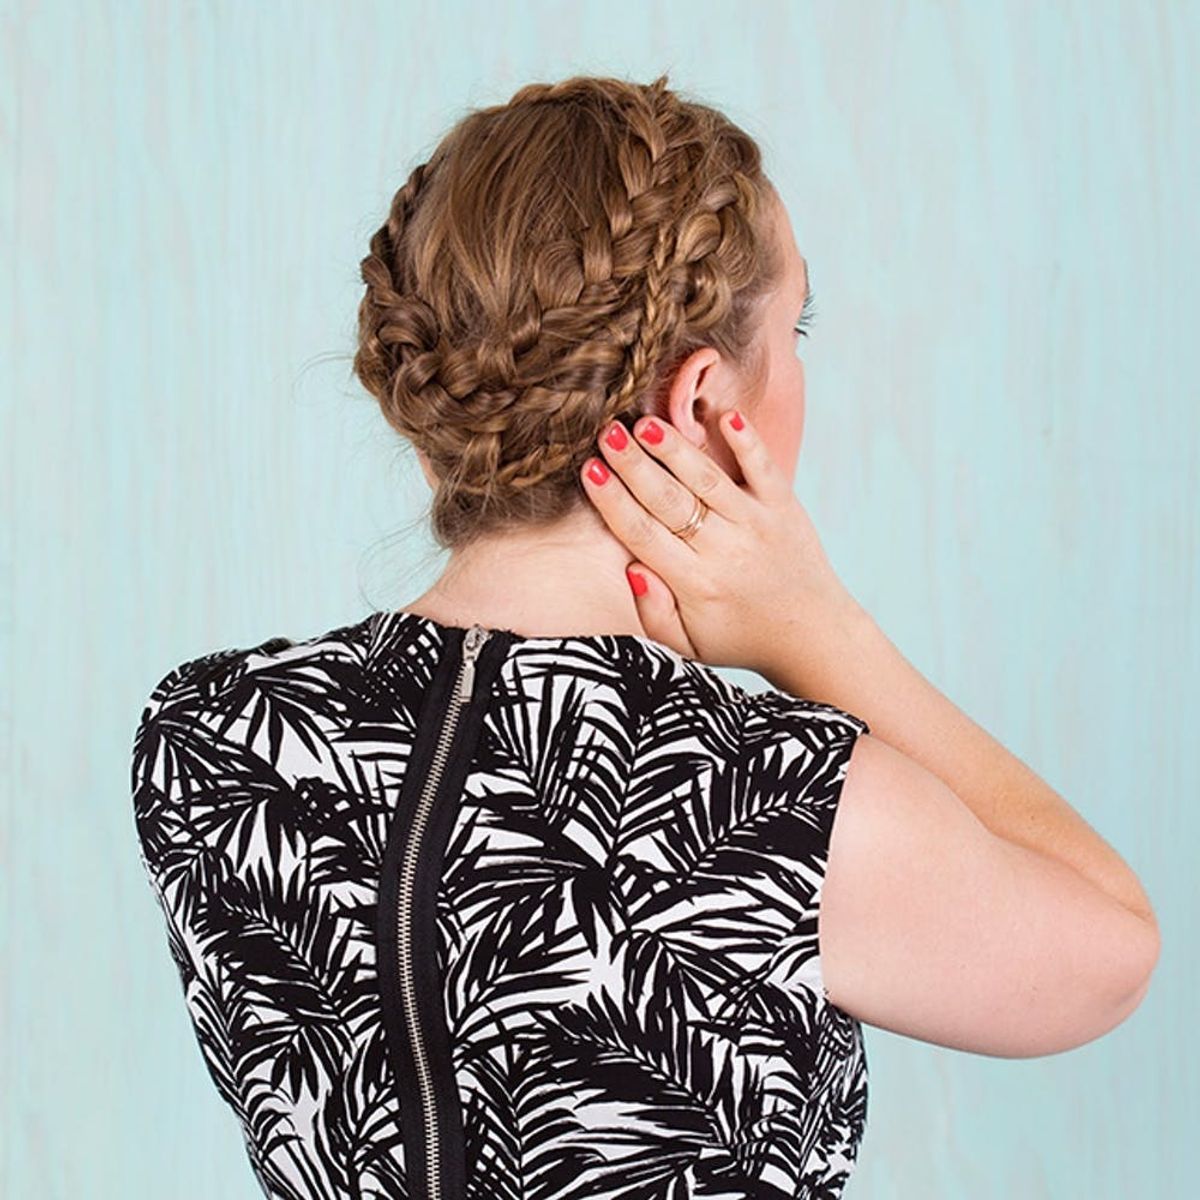 You Won’t Believe How Simple It Is to Recreate This Spiral Braid